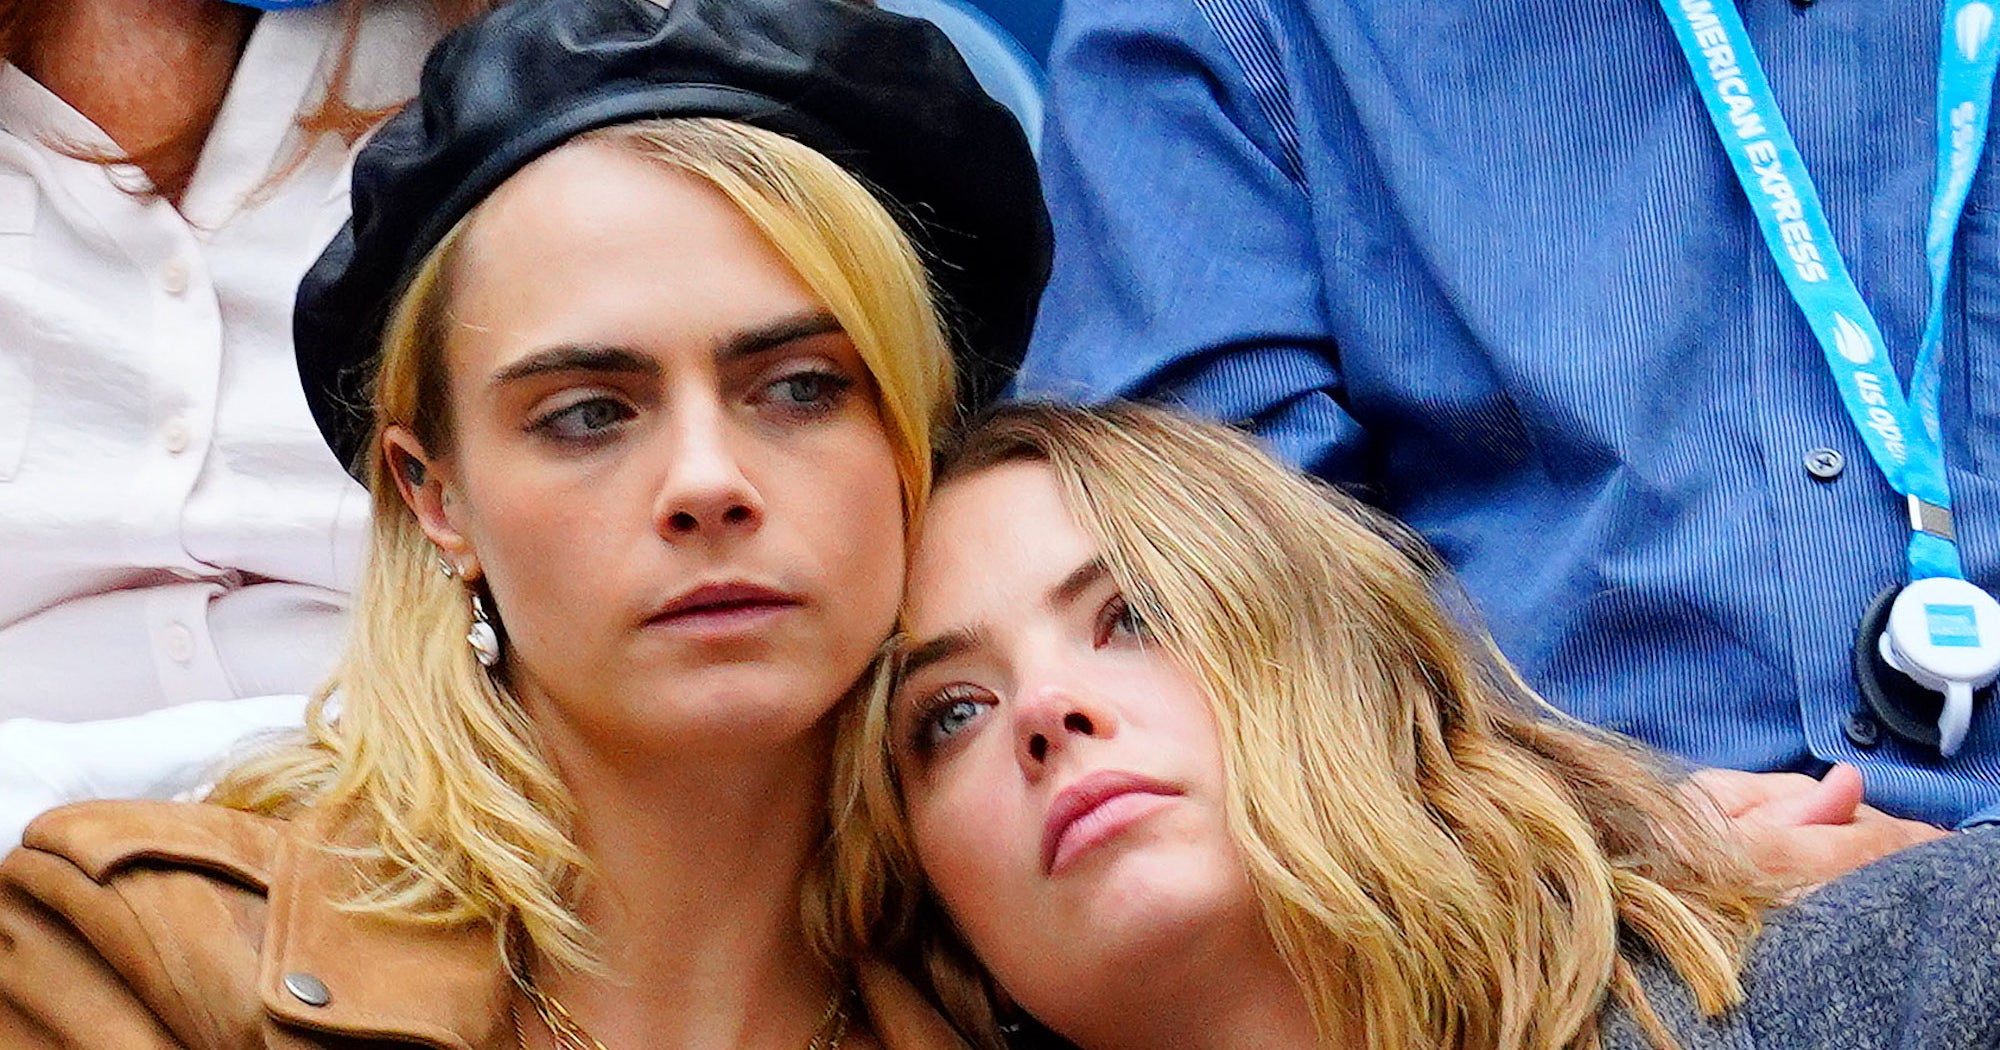 What Happened With Cara Delevingne